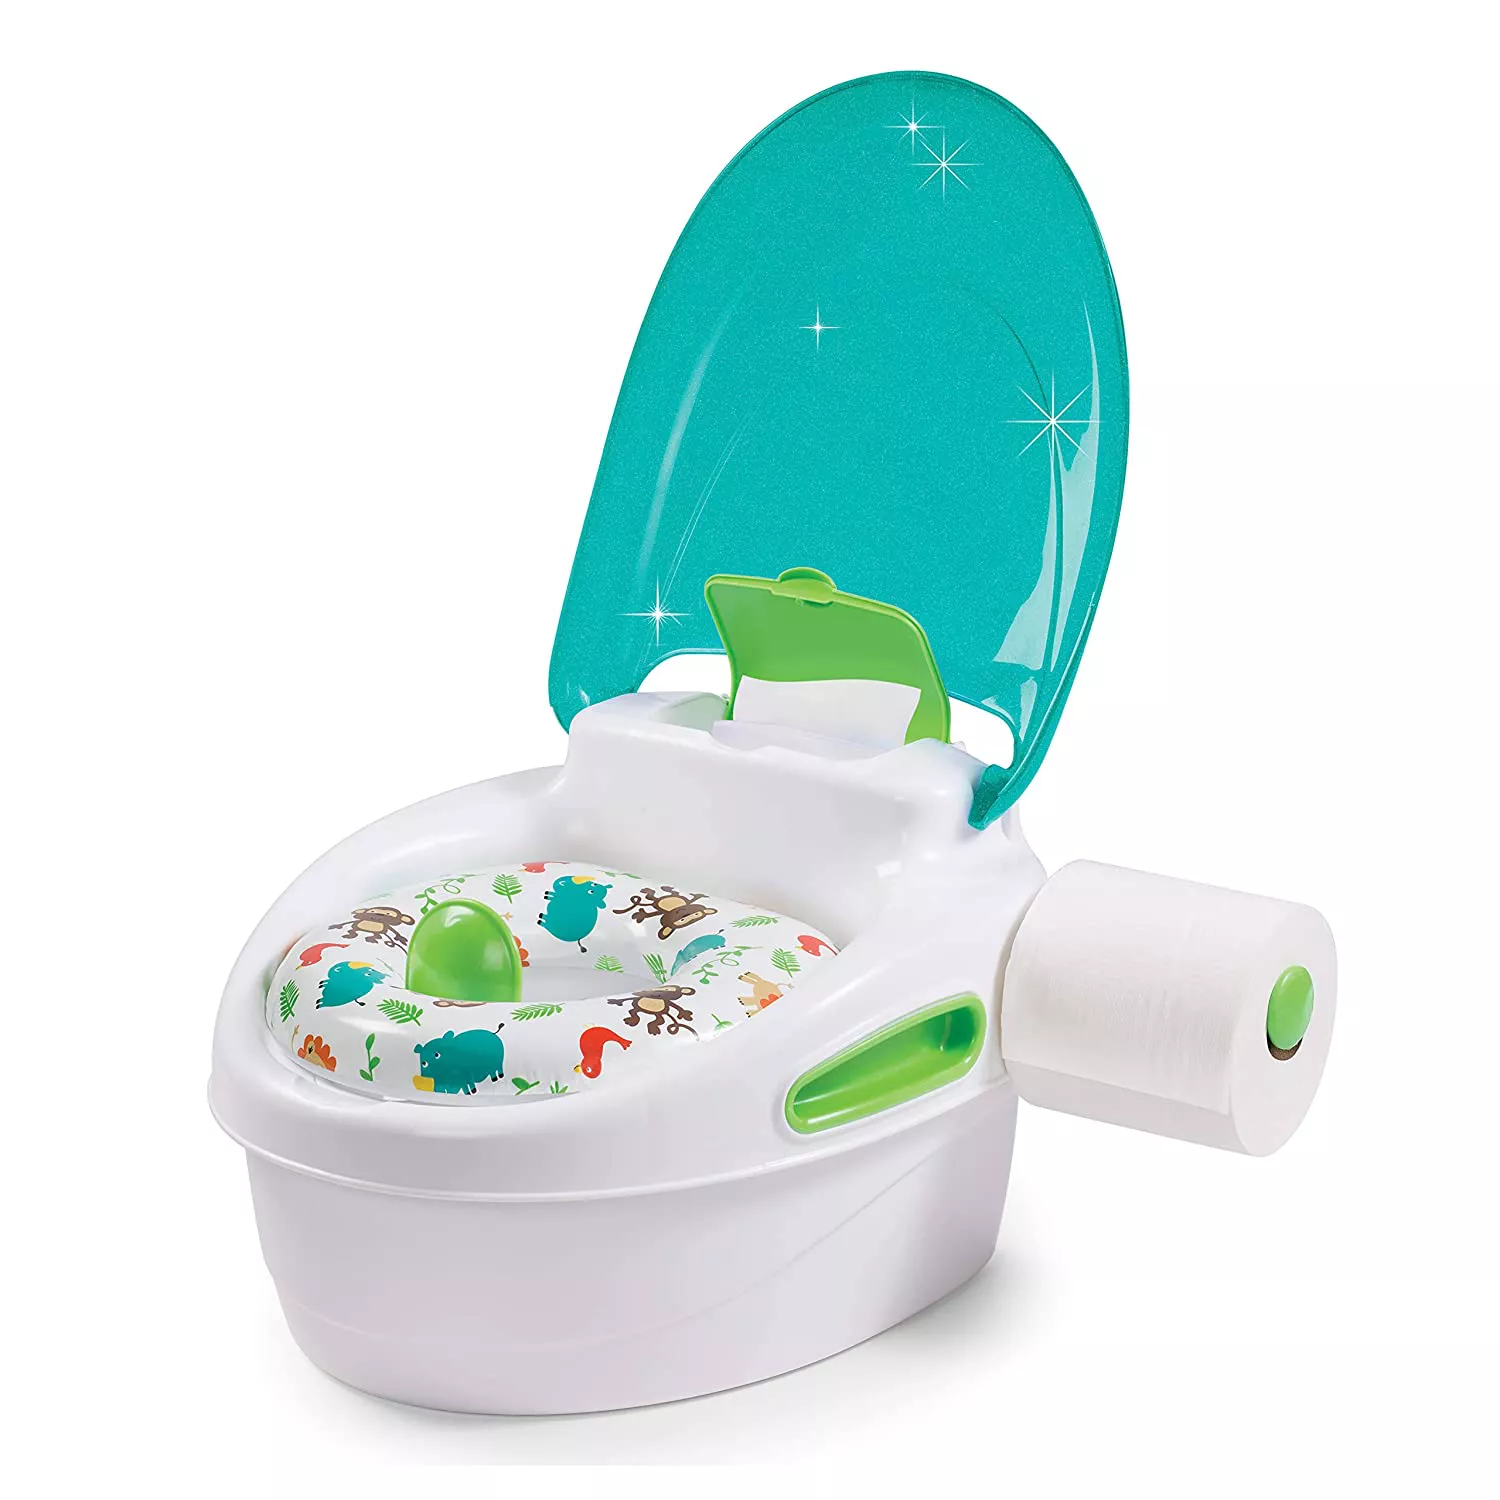 Summer Step by Step Potty